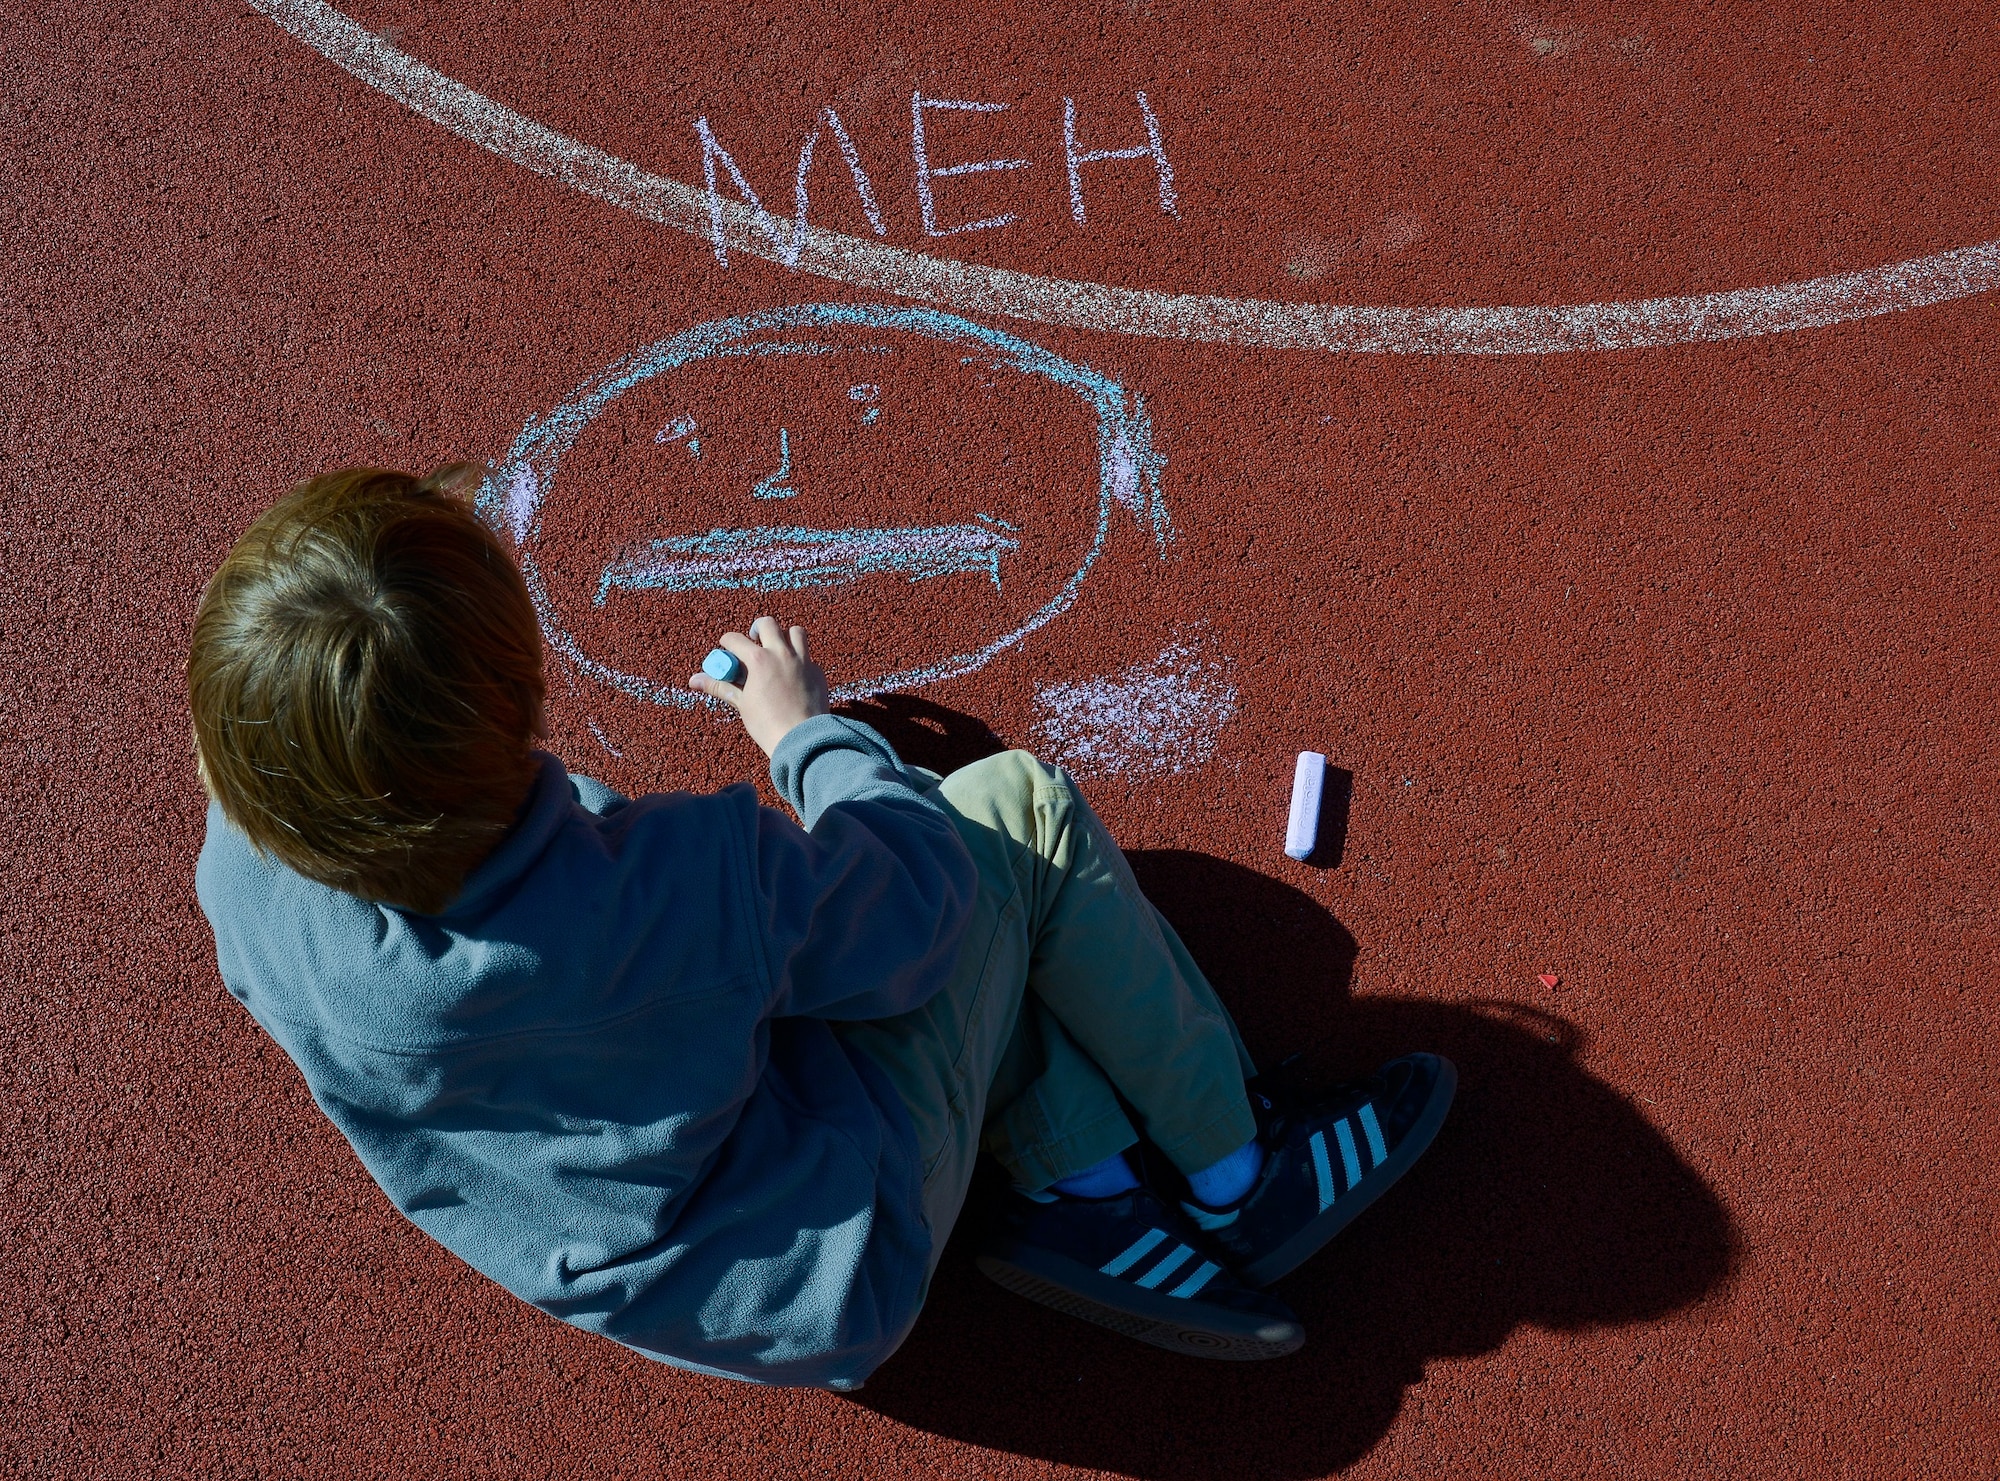 A child at Vogelweh Elementary School draws out his emotions at the time during a therapy session April 21, 2016, at Vogelweh Air Base, Germany. Students who were separated from their parents during the Turkey evacuation and transitioned to Vogelweh schools undergo therapy to help them cope with stress and anxiety issues they may have. (U.S. Air force photo/Airman 1st Class Lane T. Plummer)